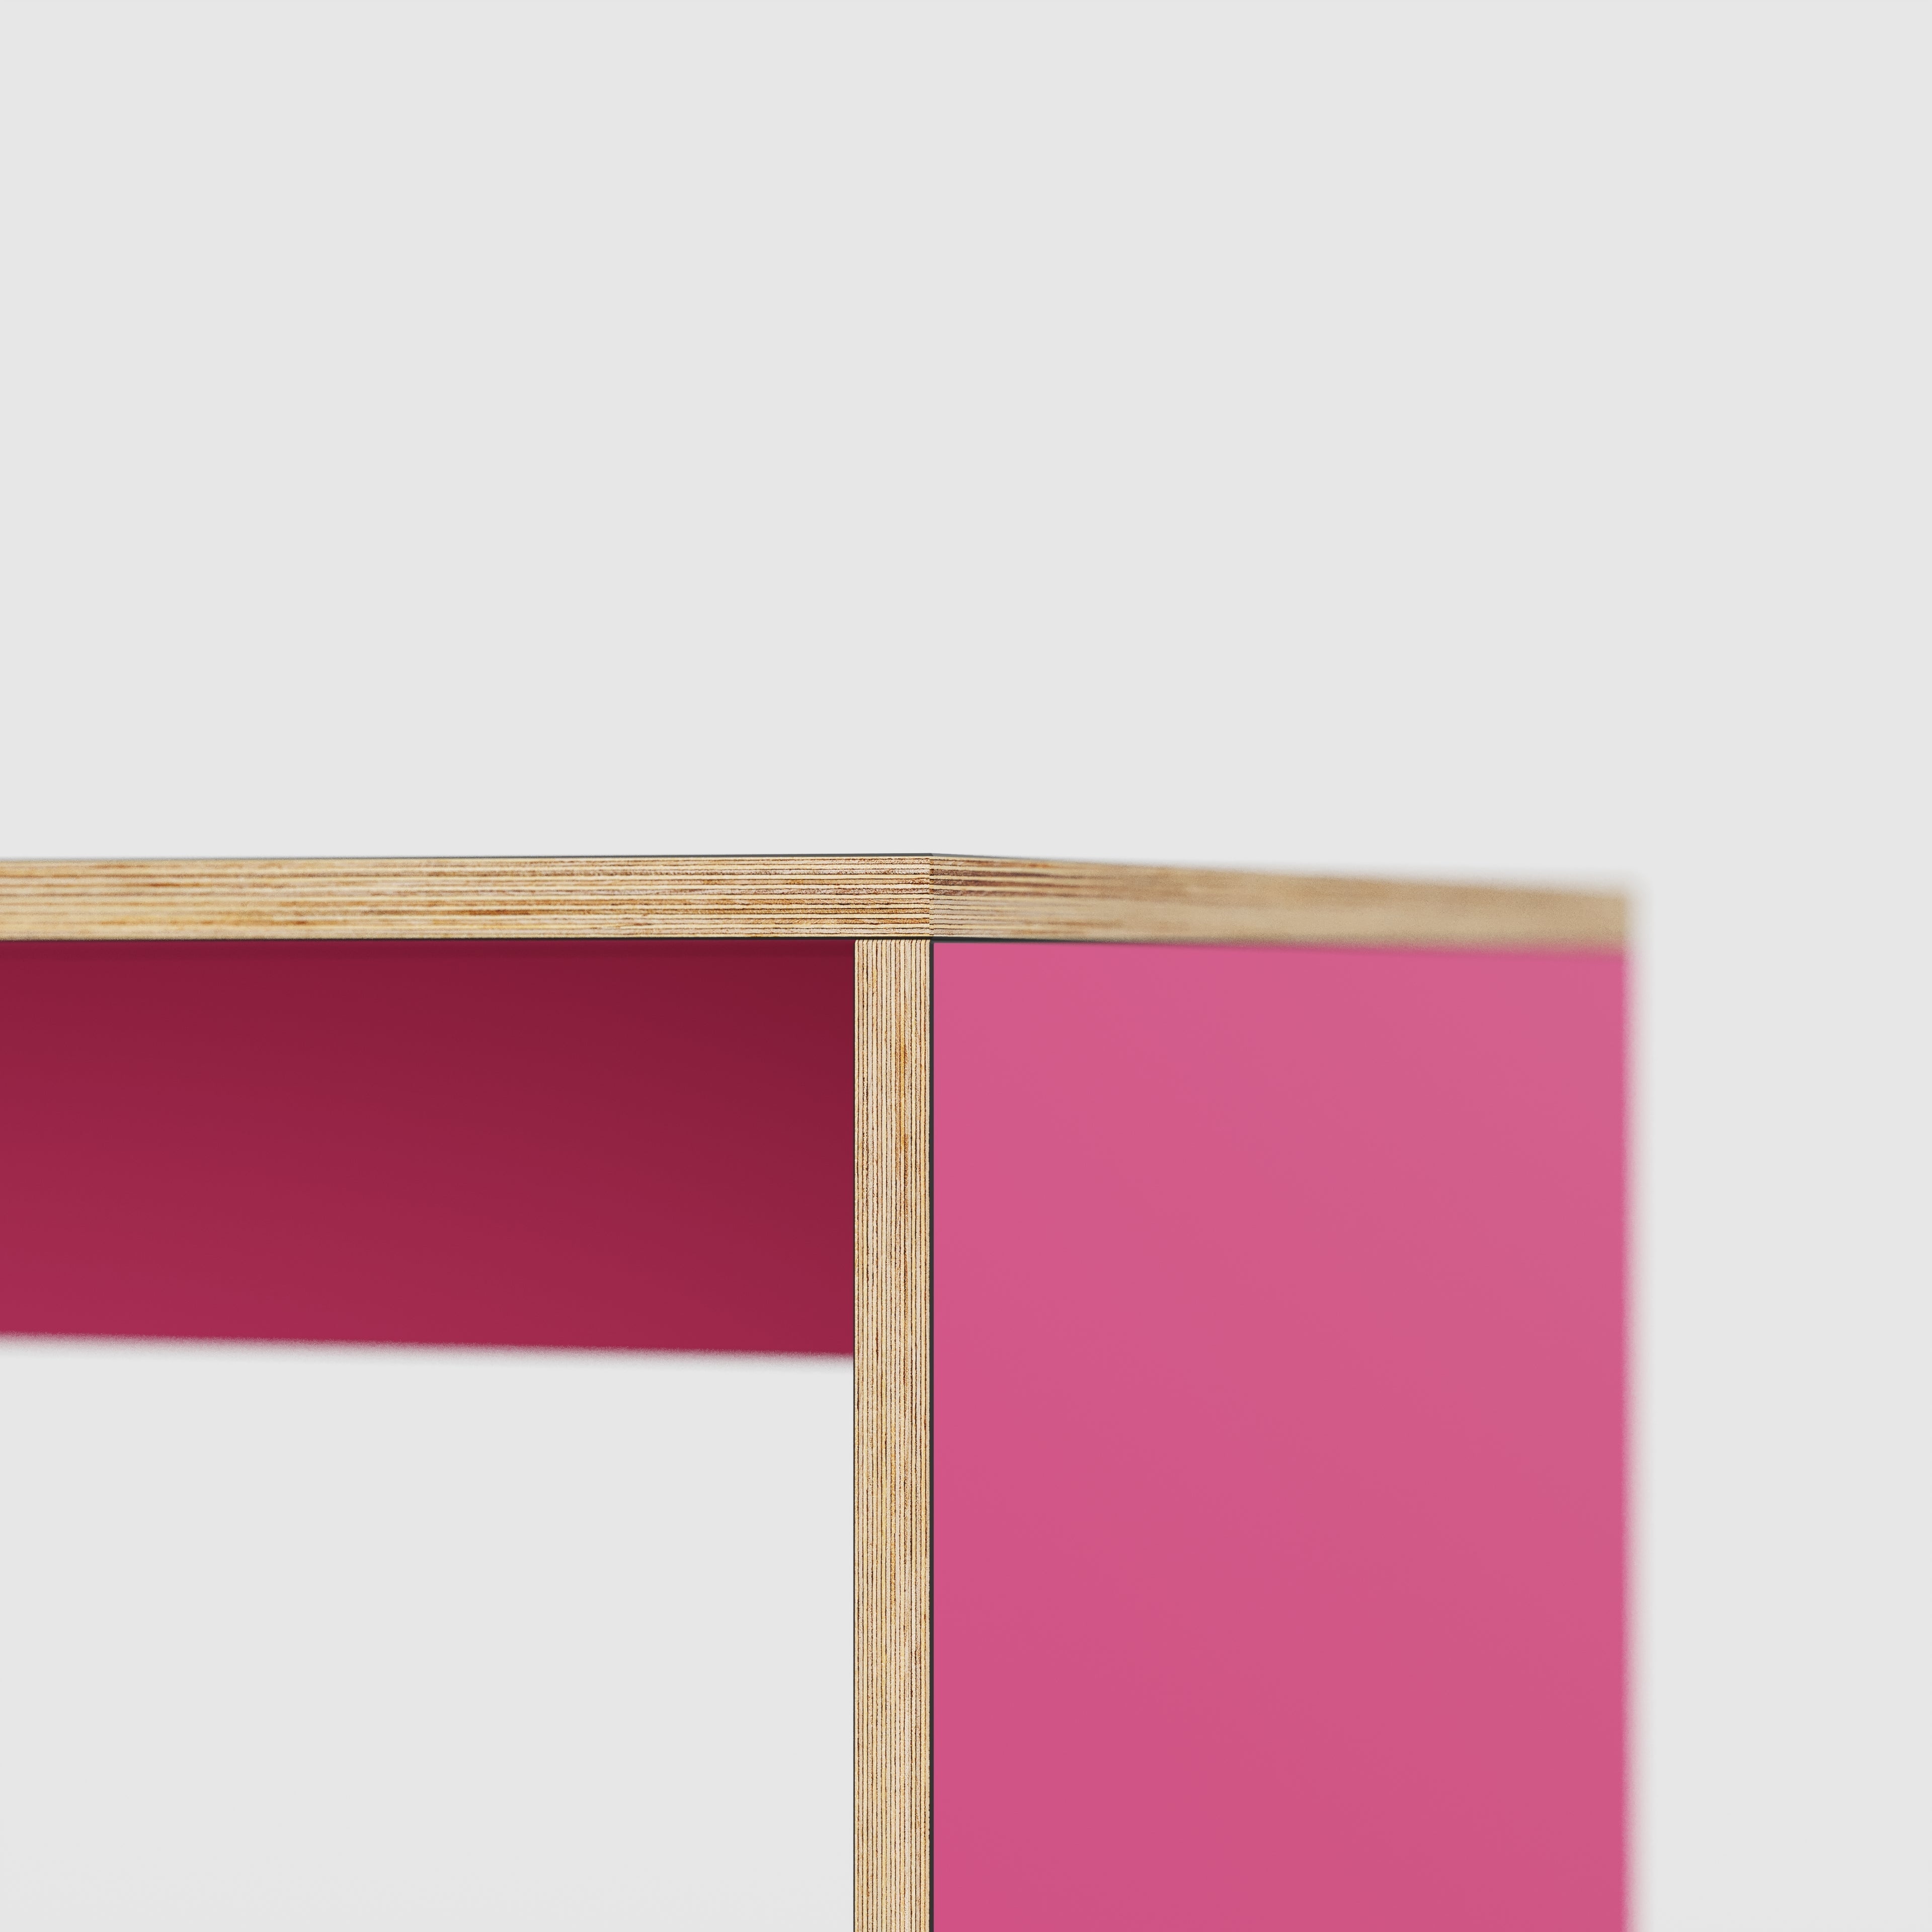 Table with Solid Sides - Formica Juicy Pink - 5600(w) x 1000(d) x 750(h)